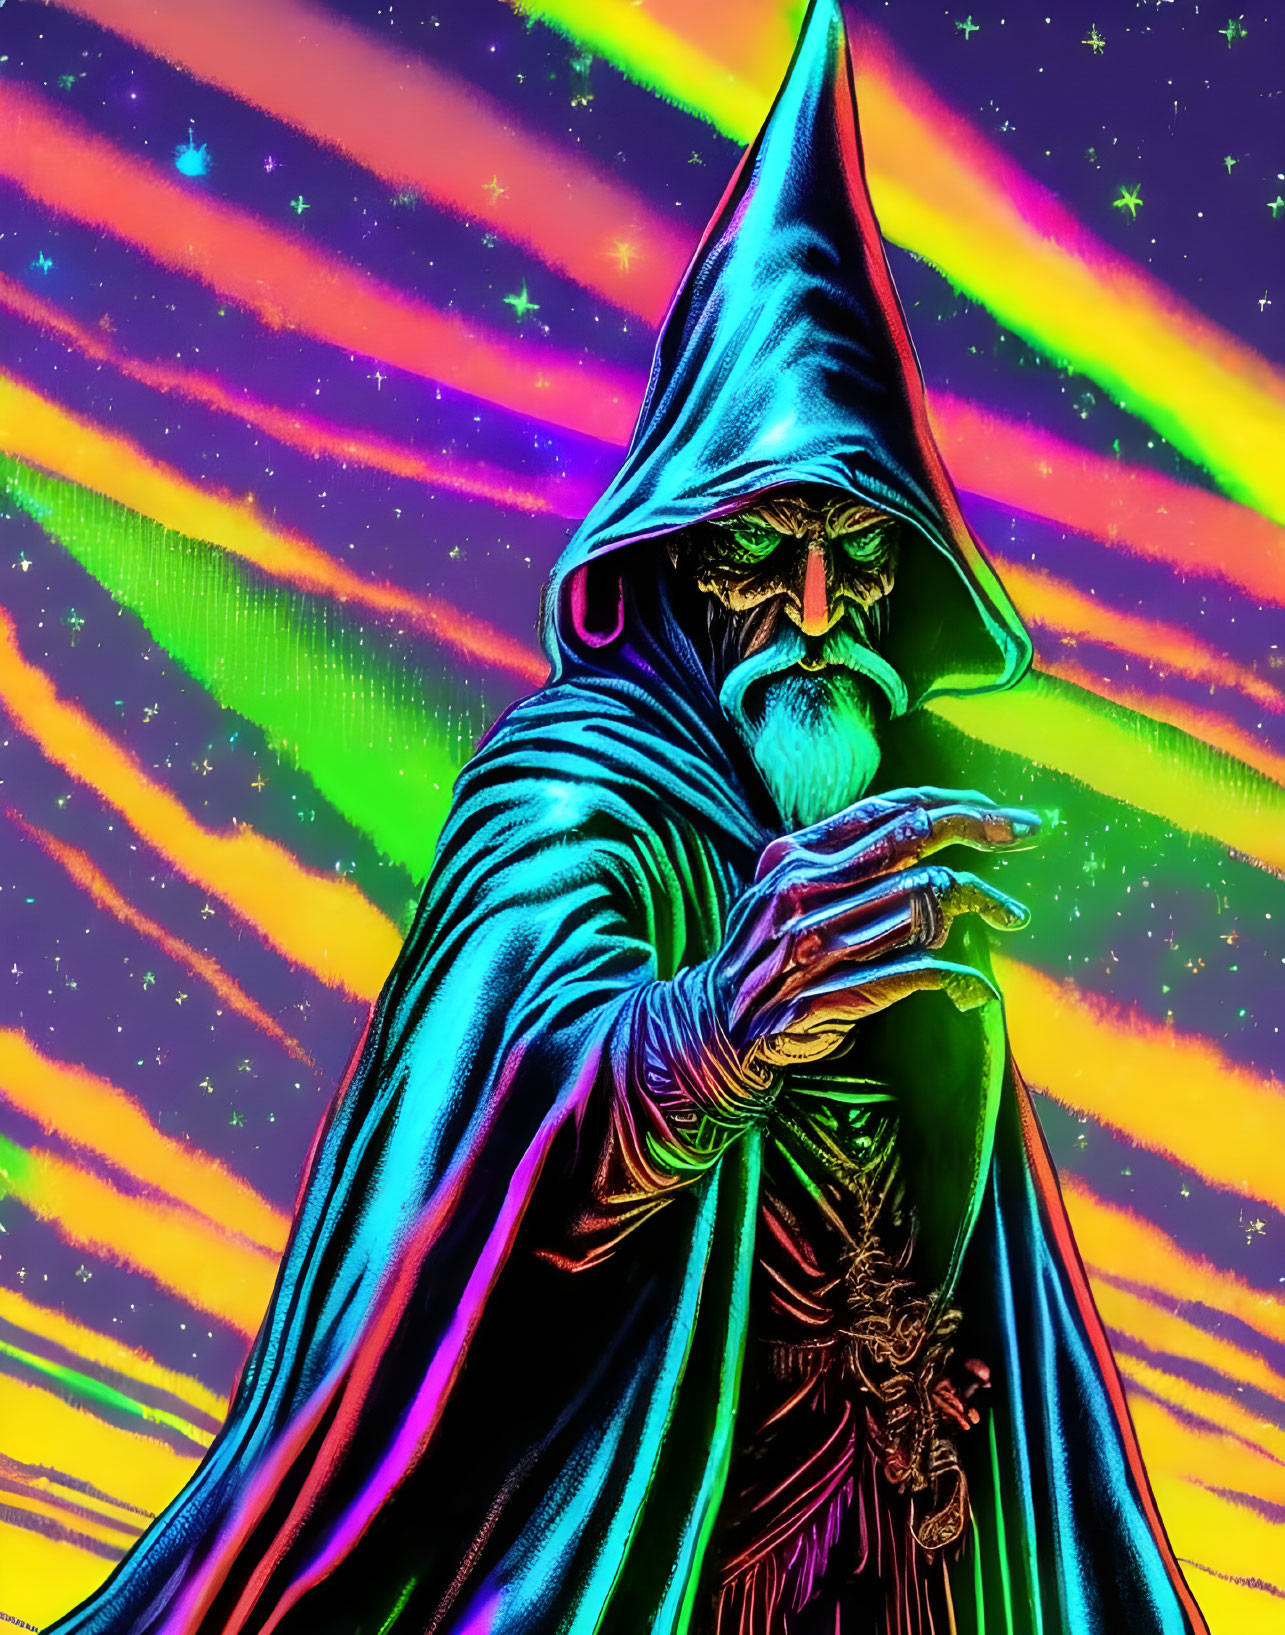 Colorful Wizard in Cloak and Pointed Hat Against Psychedelic Rainbow Background